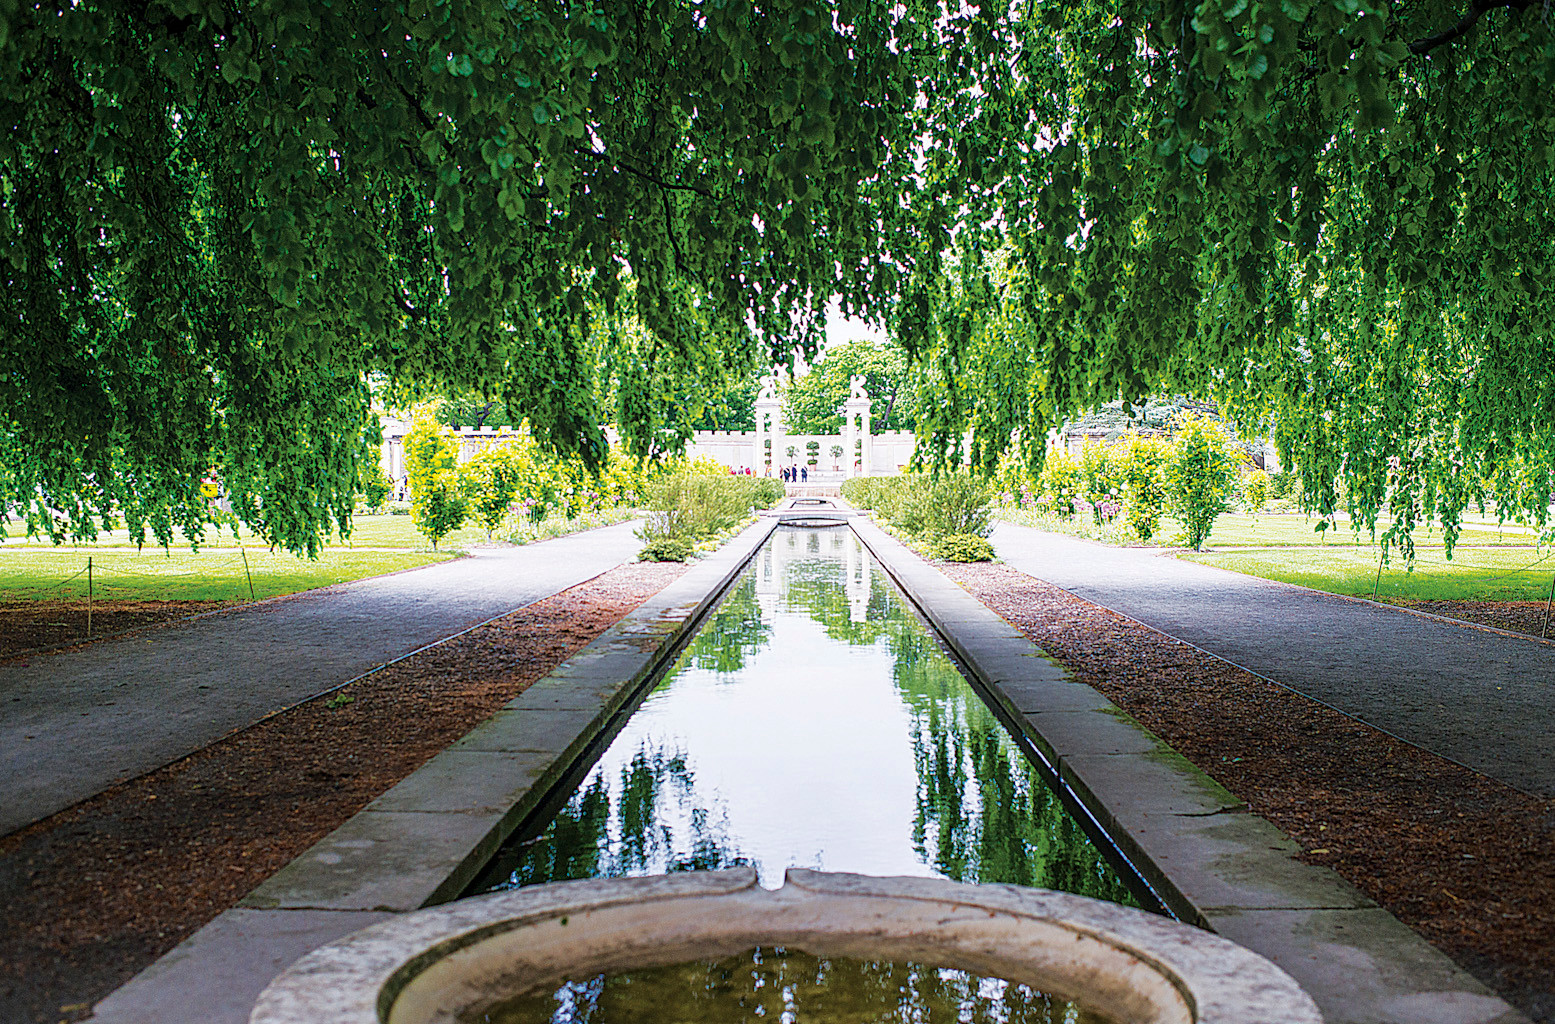 The entrance to the Walled Gardens is shrouded in weeping beech trees during a tour of the park on May 22.